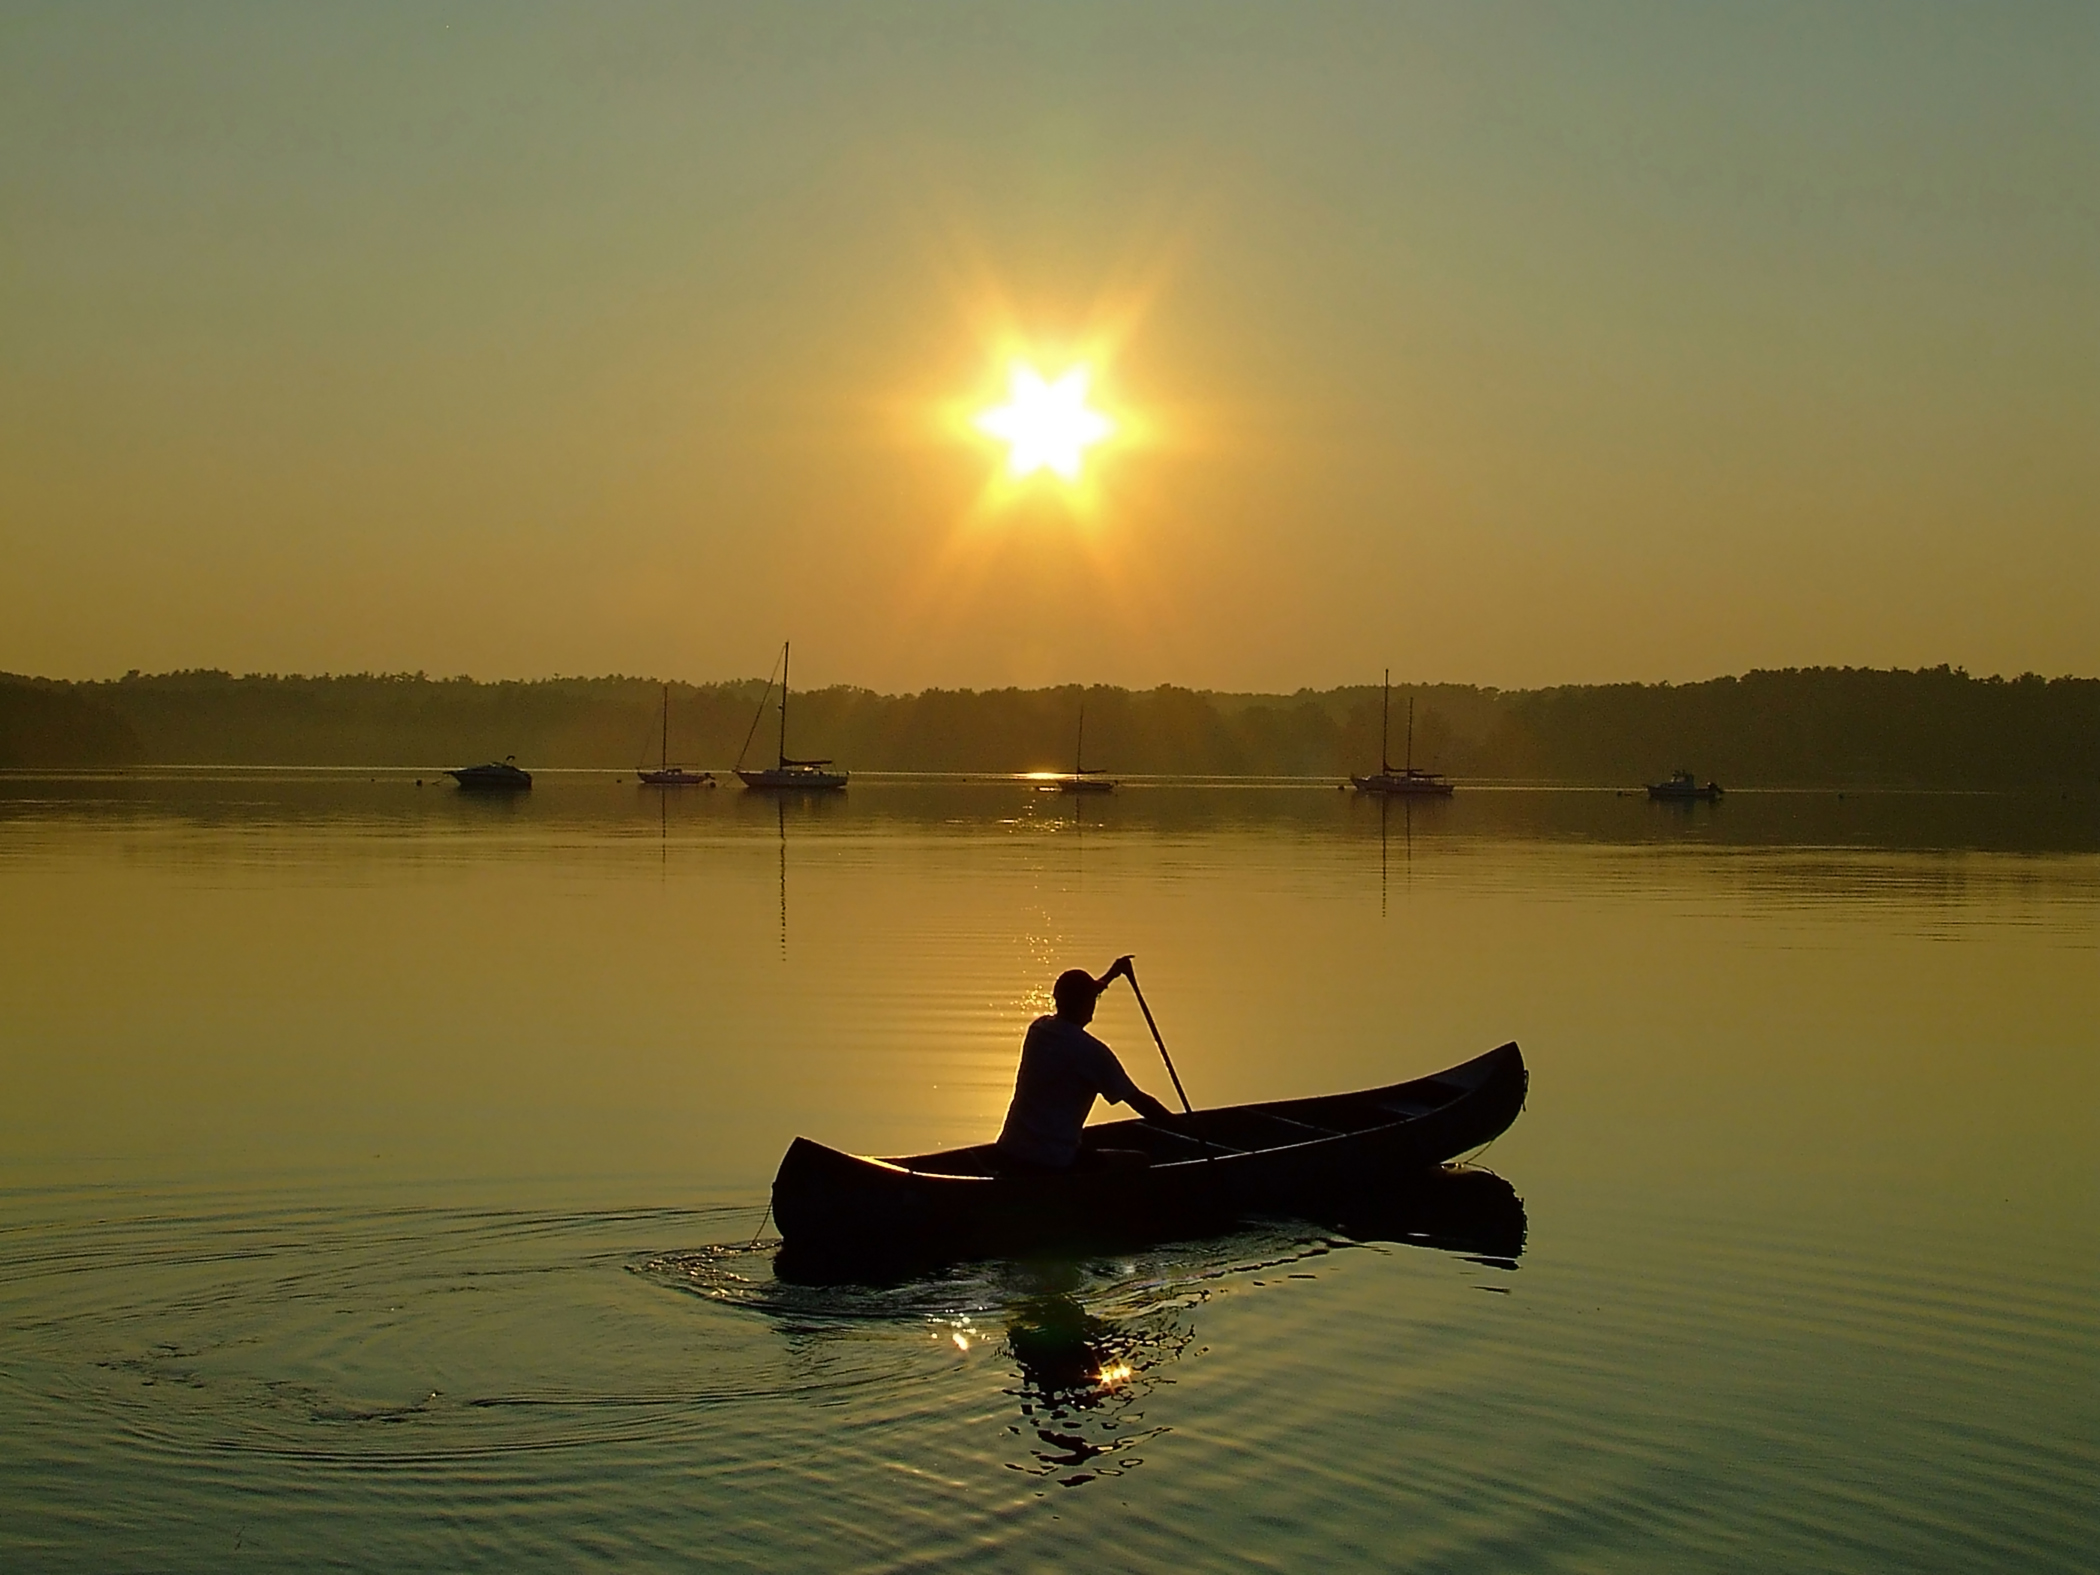 Canoe Silhouette (user submitted)